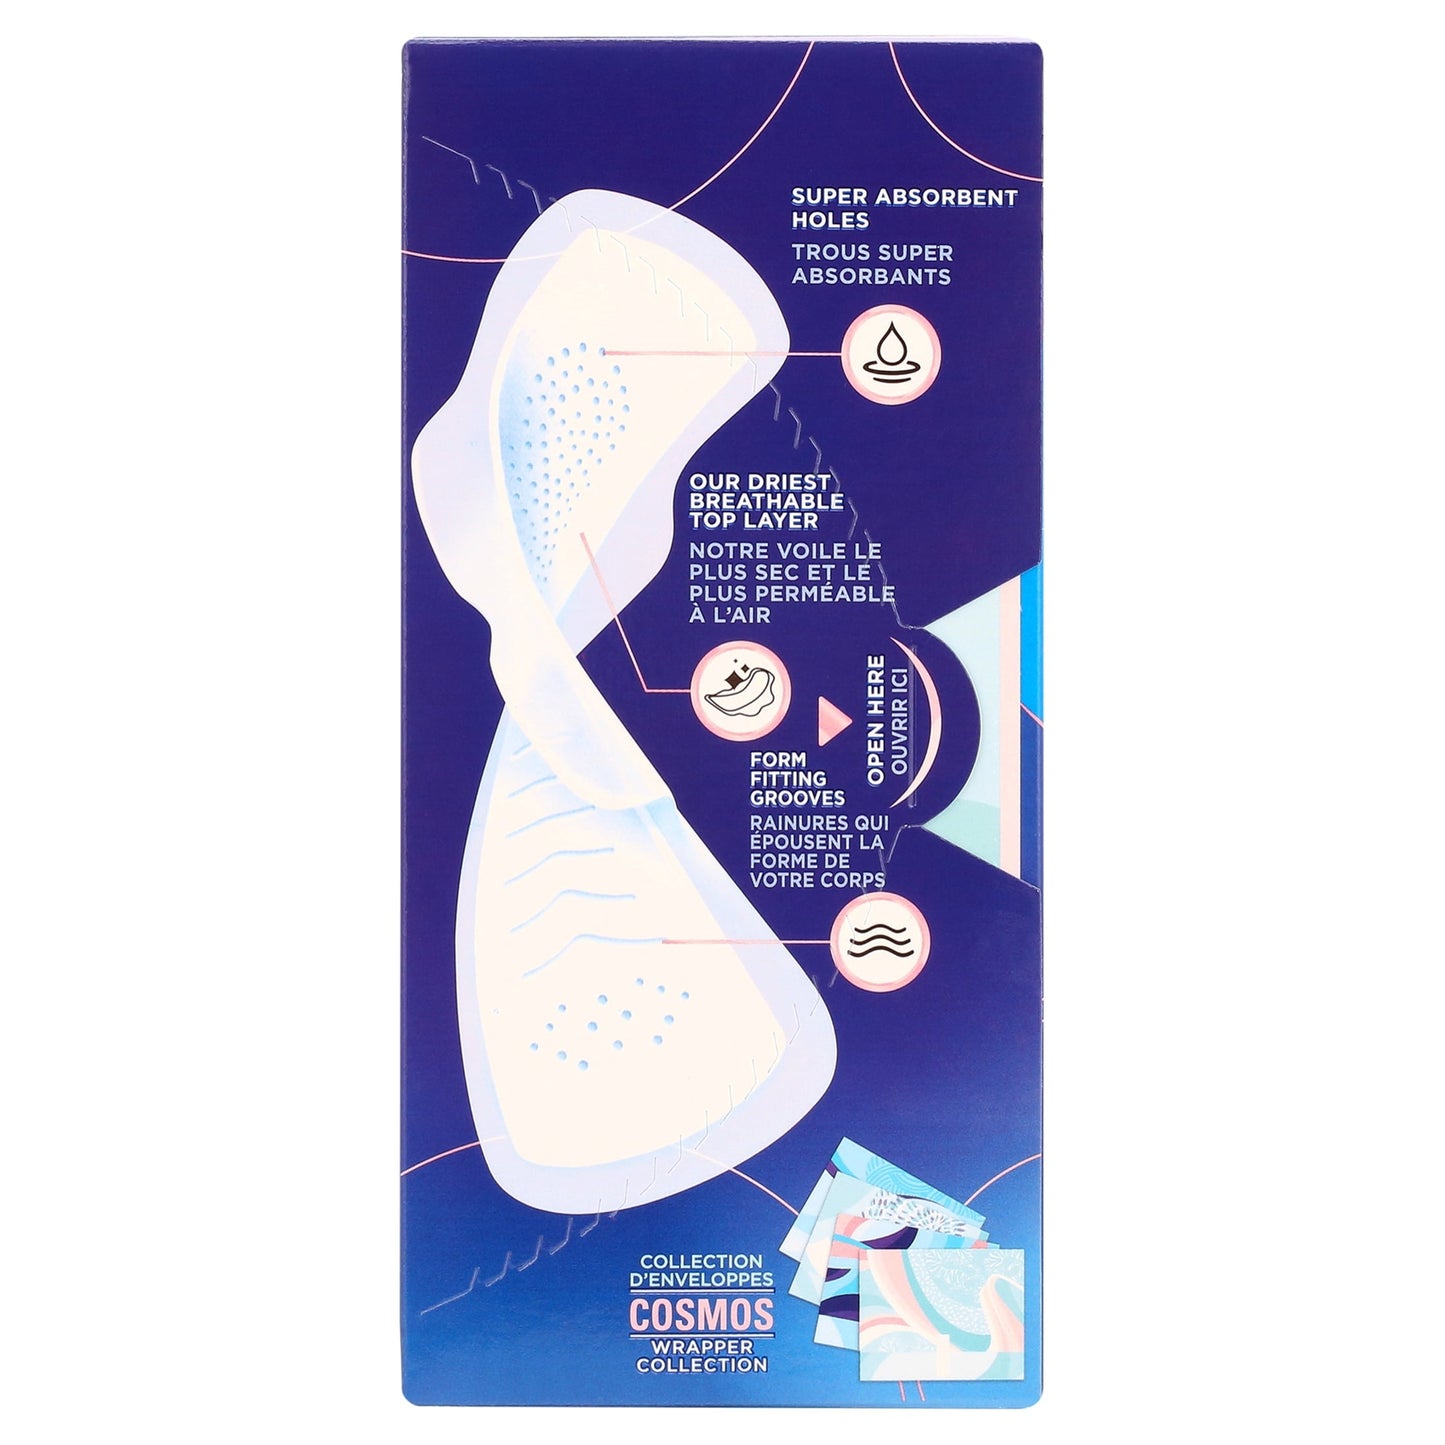 Always Infinity Feminine Pads with wings, Size 5, Extra Heavy Overnight Absorbency, Unscented, 22 Count